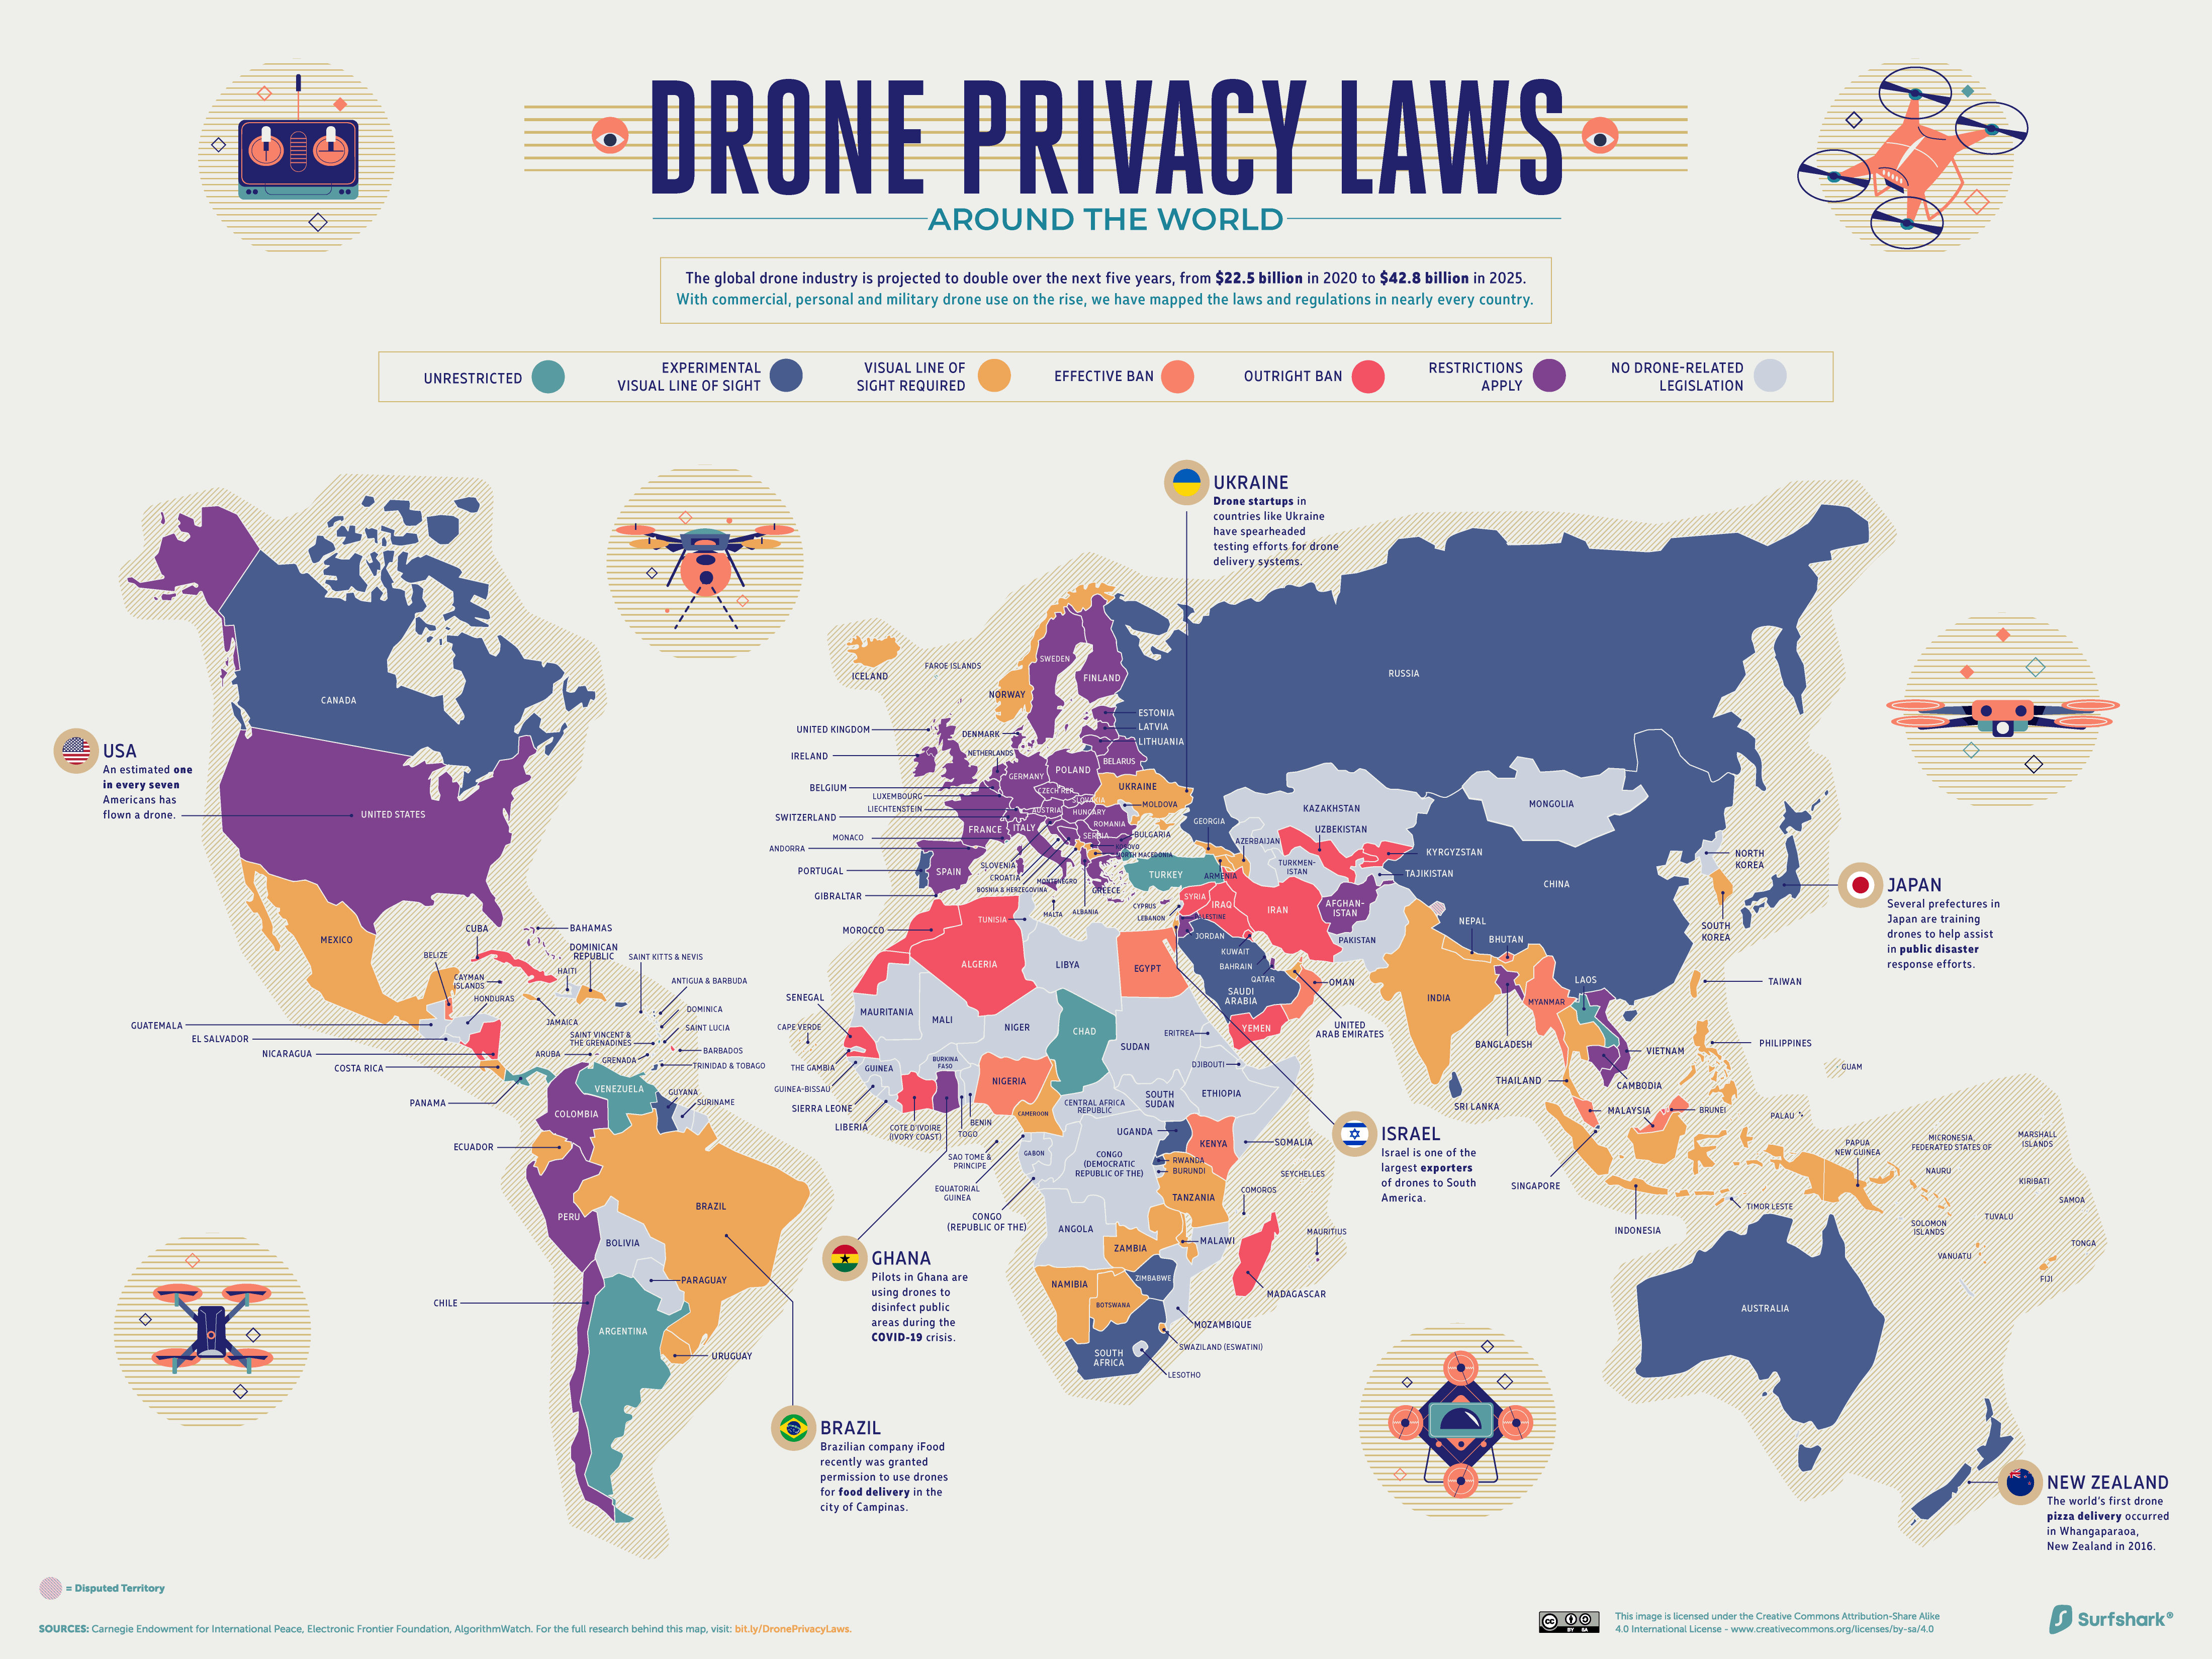 a map of the world which includes drone privacy laws for each country